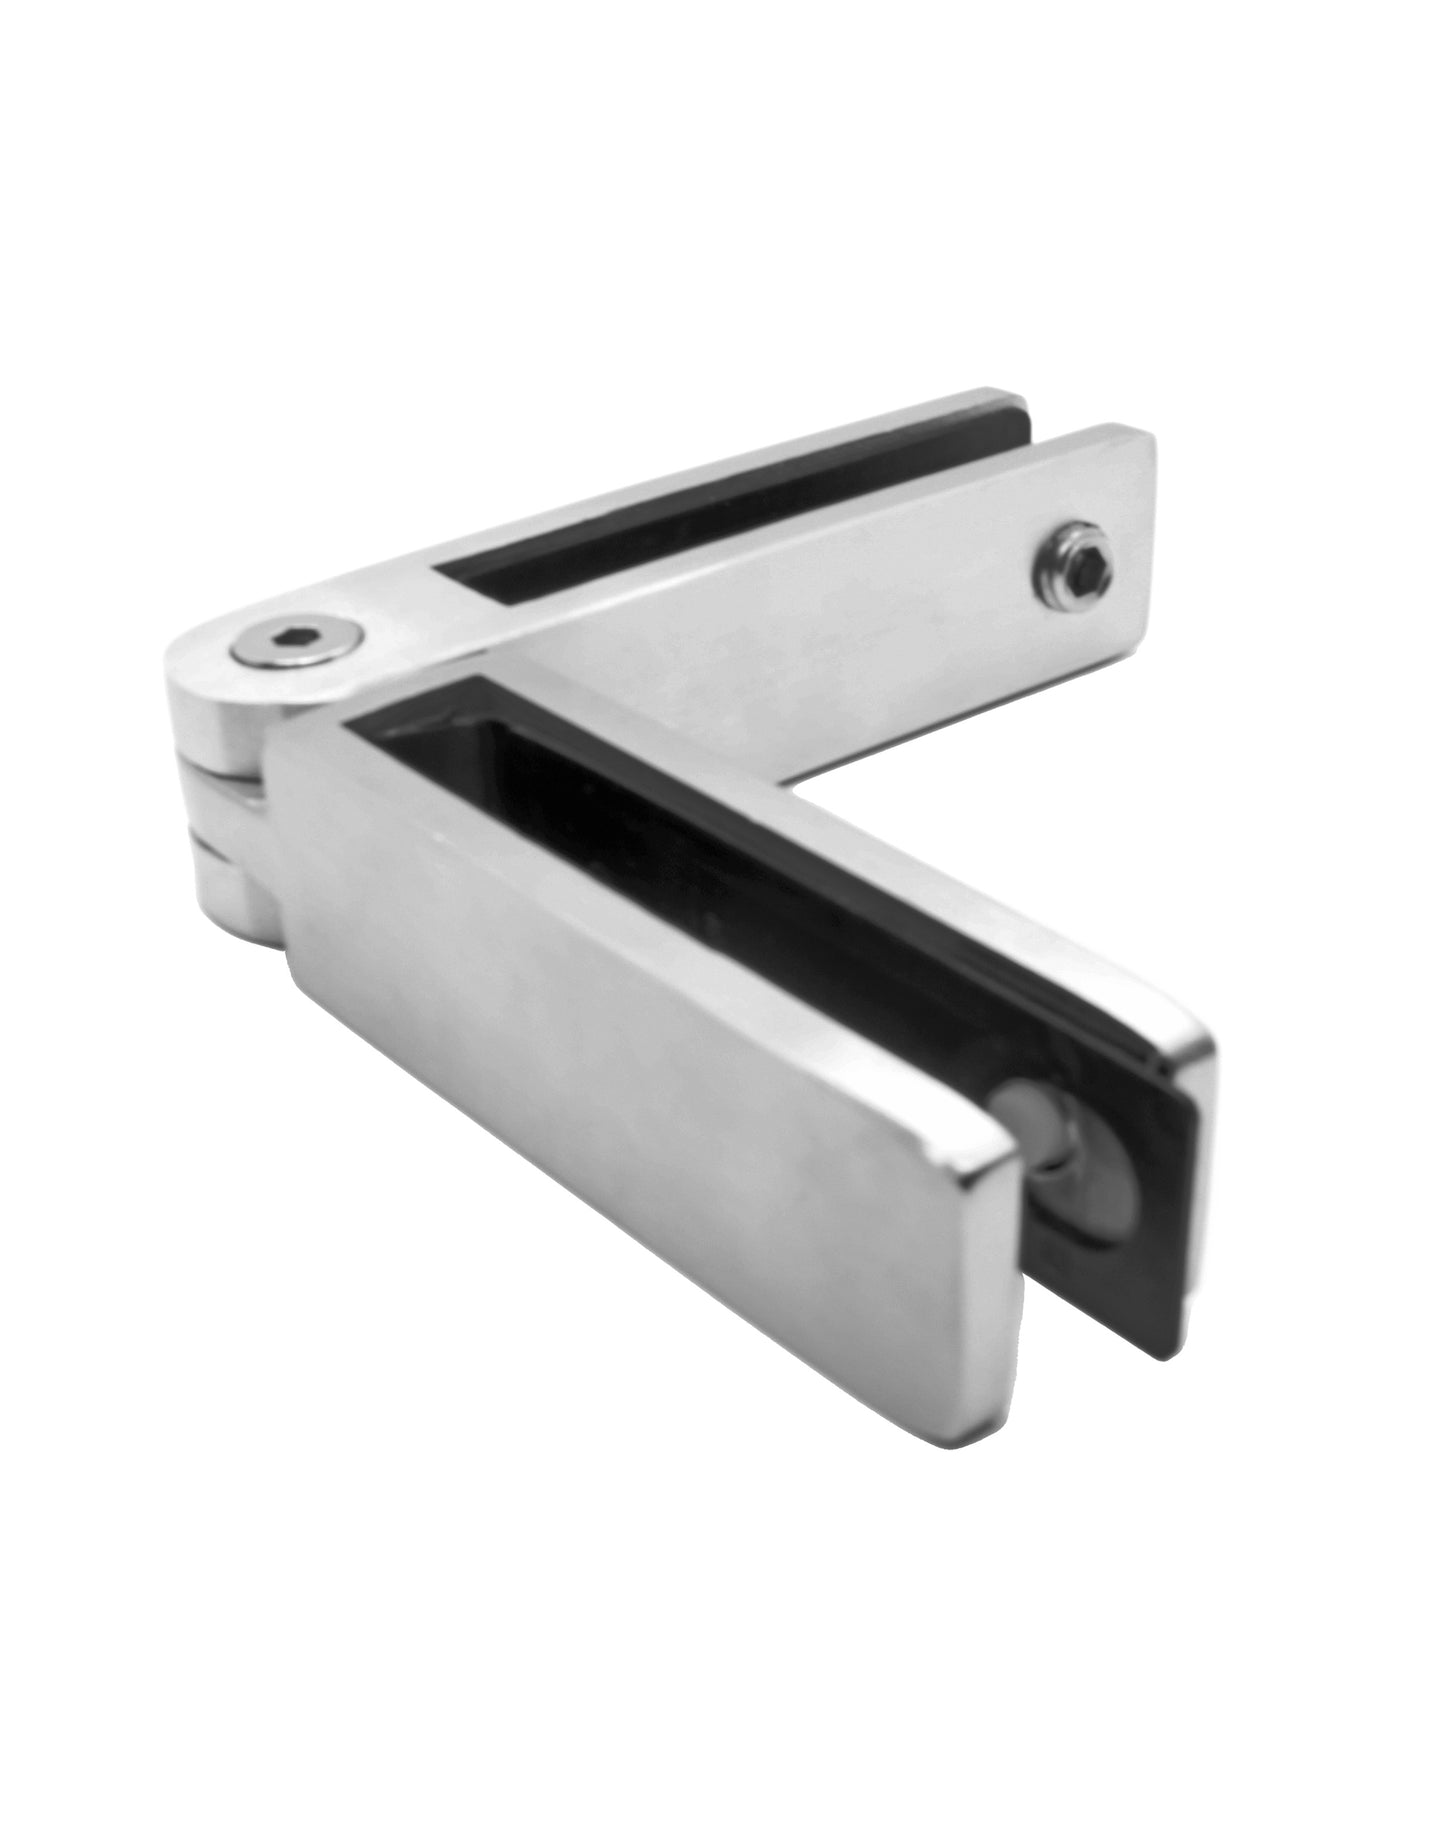 Stainless Steel 316 Adjustable 90 to 180 Degree 1/2" Glass to Glass Clamp Railing  (G1200) - SHEMONICO